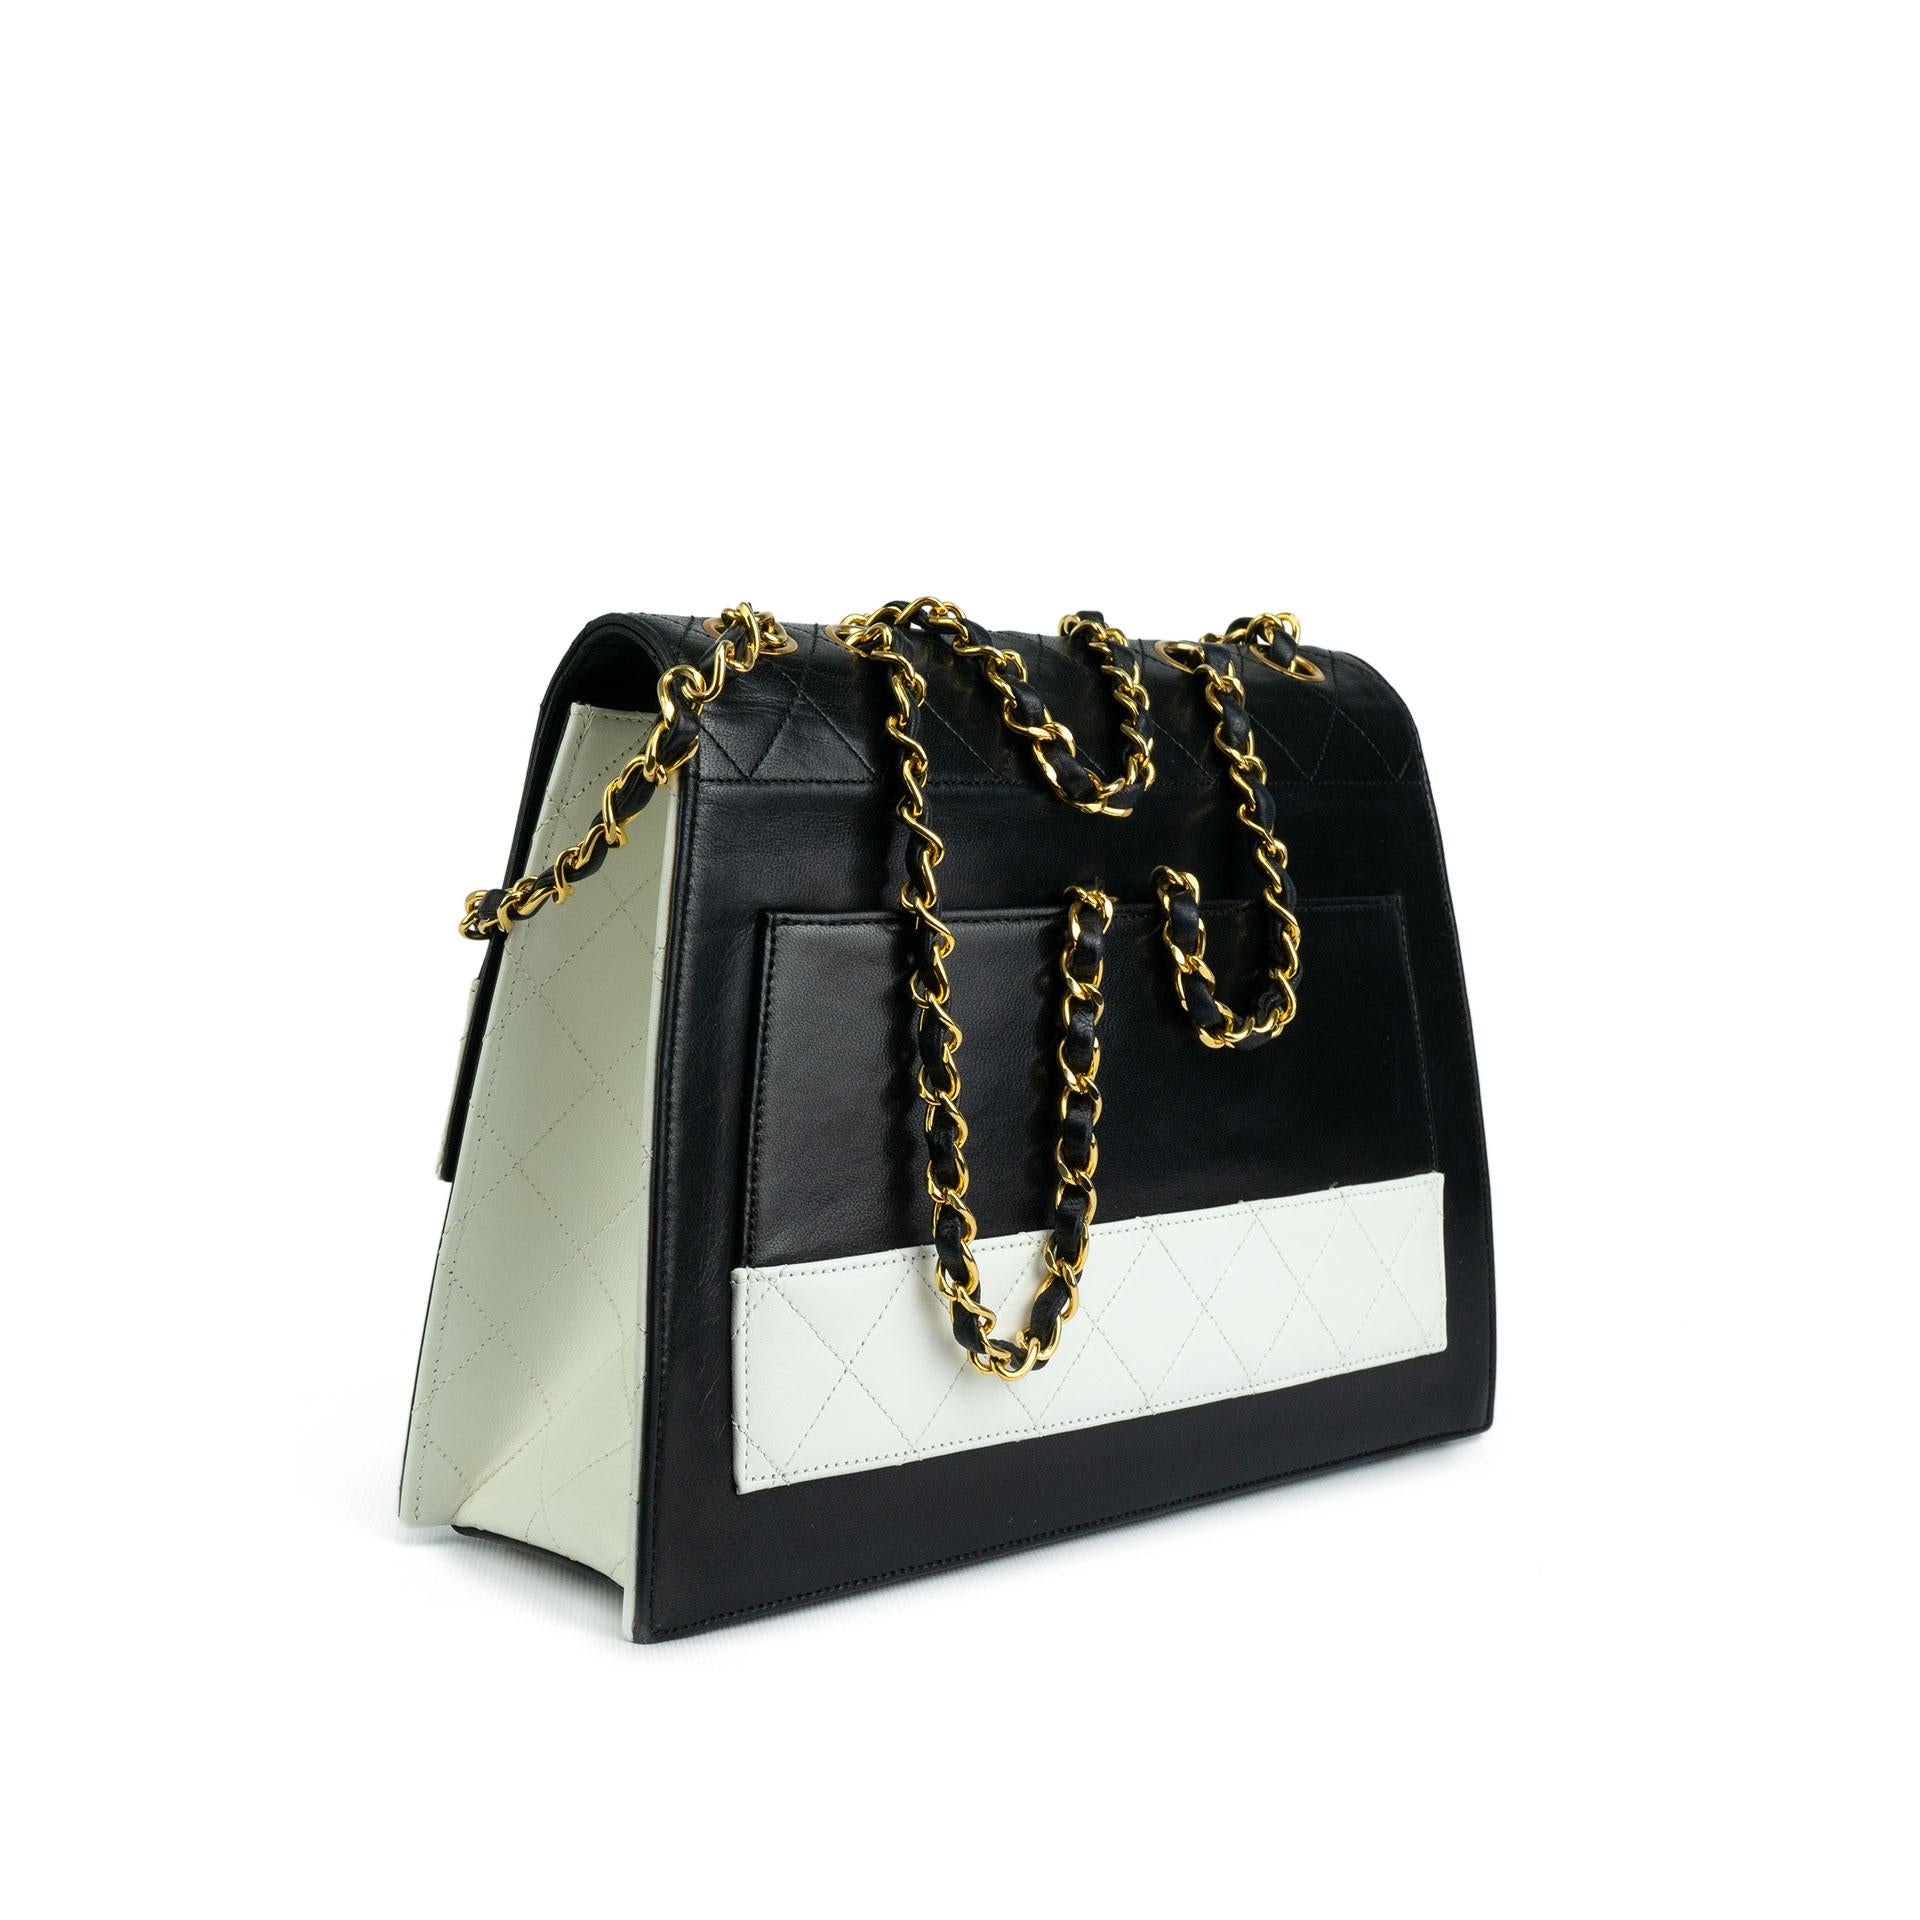 Chanel 1989 Two Tone Black and White Vintage Flap Bag For Sale 3